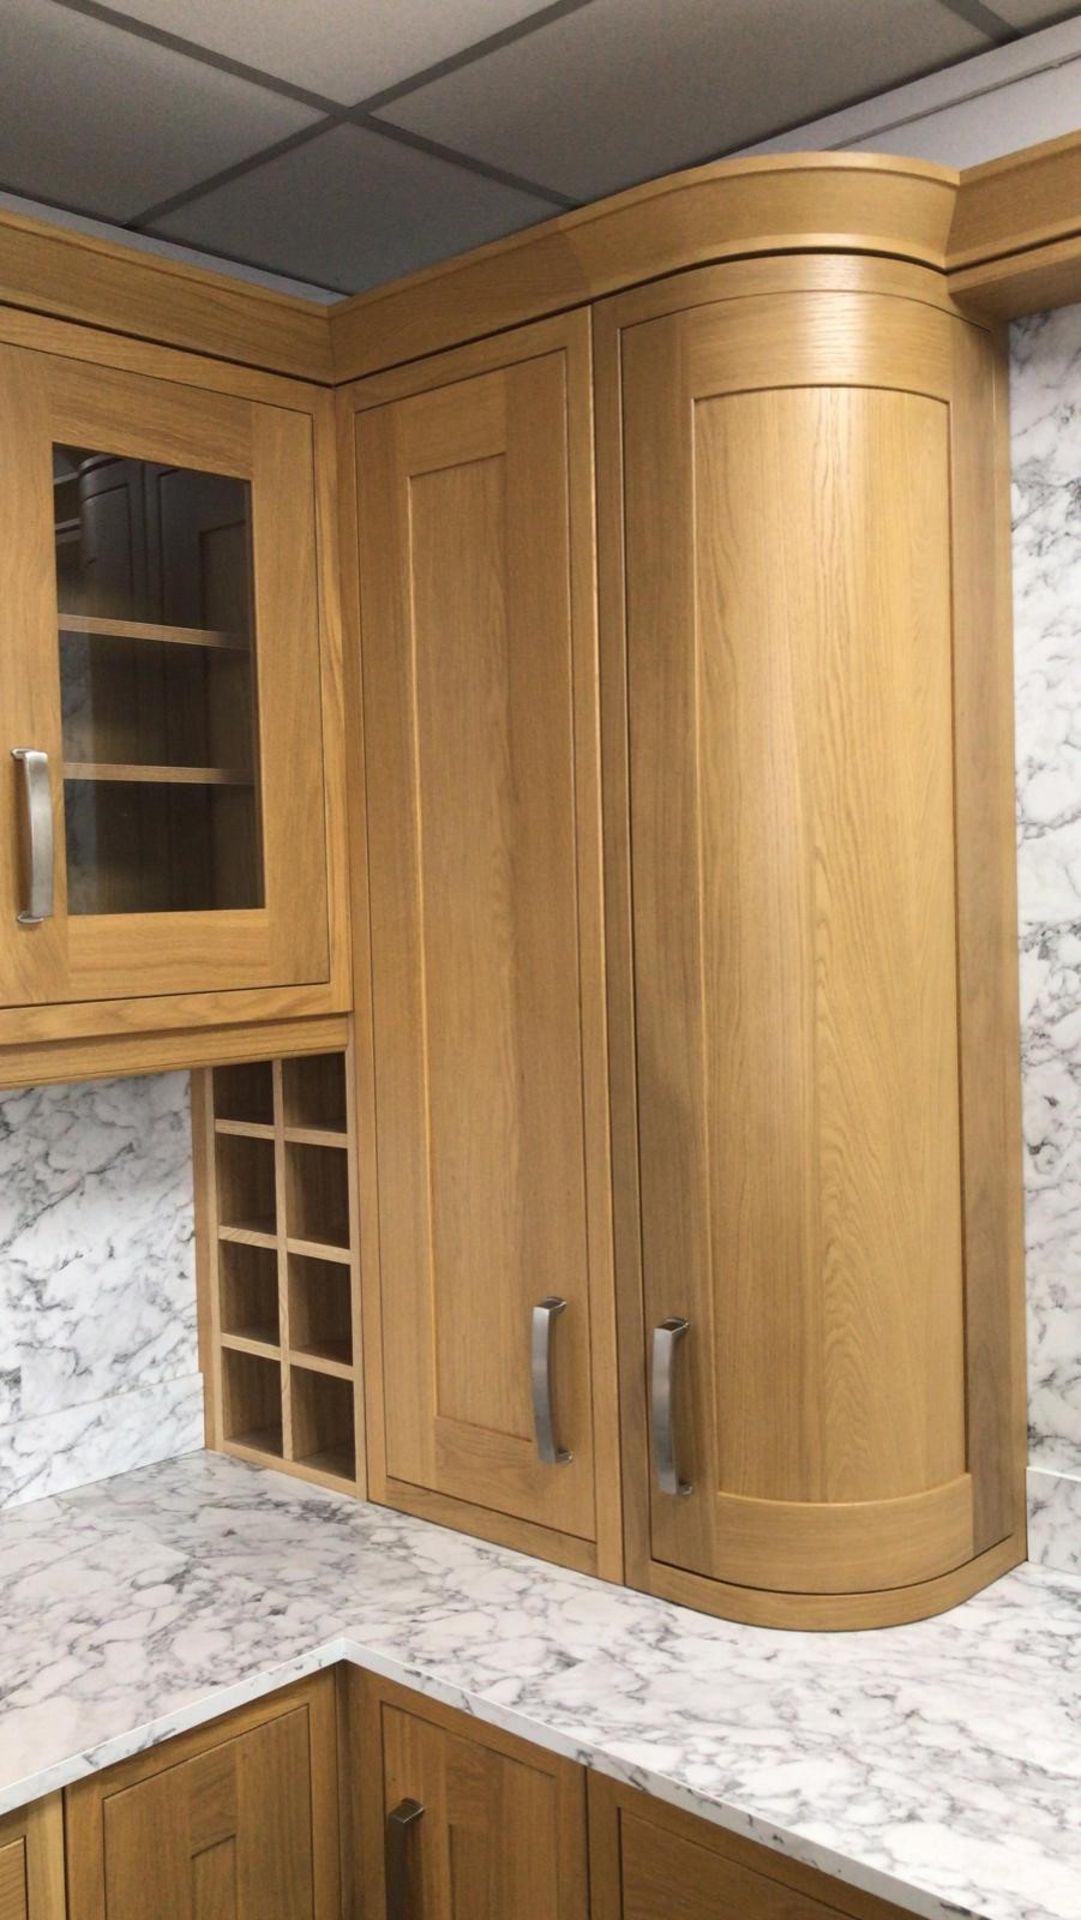 Circa 5000+ items Solid oak inframe kitchen doors inc over 100 curved doors etc, circa 87 pallets (2 - Image 4 of 15